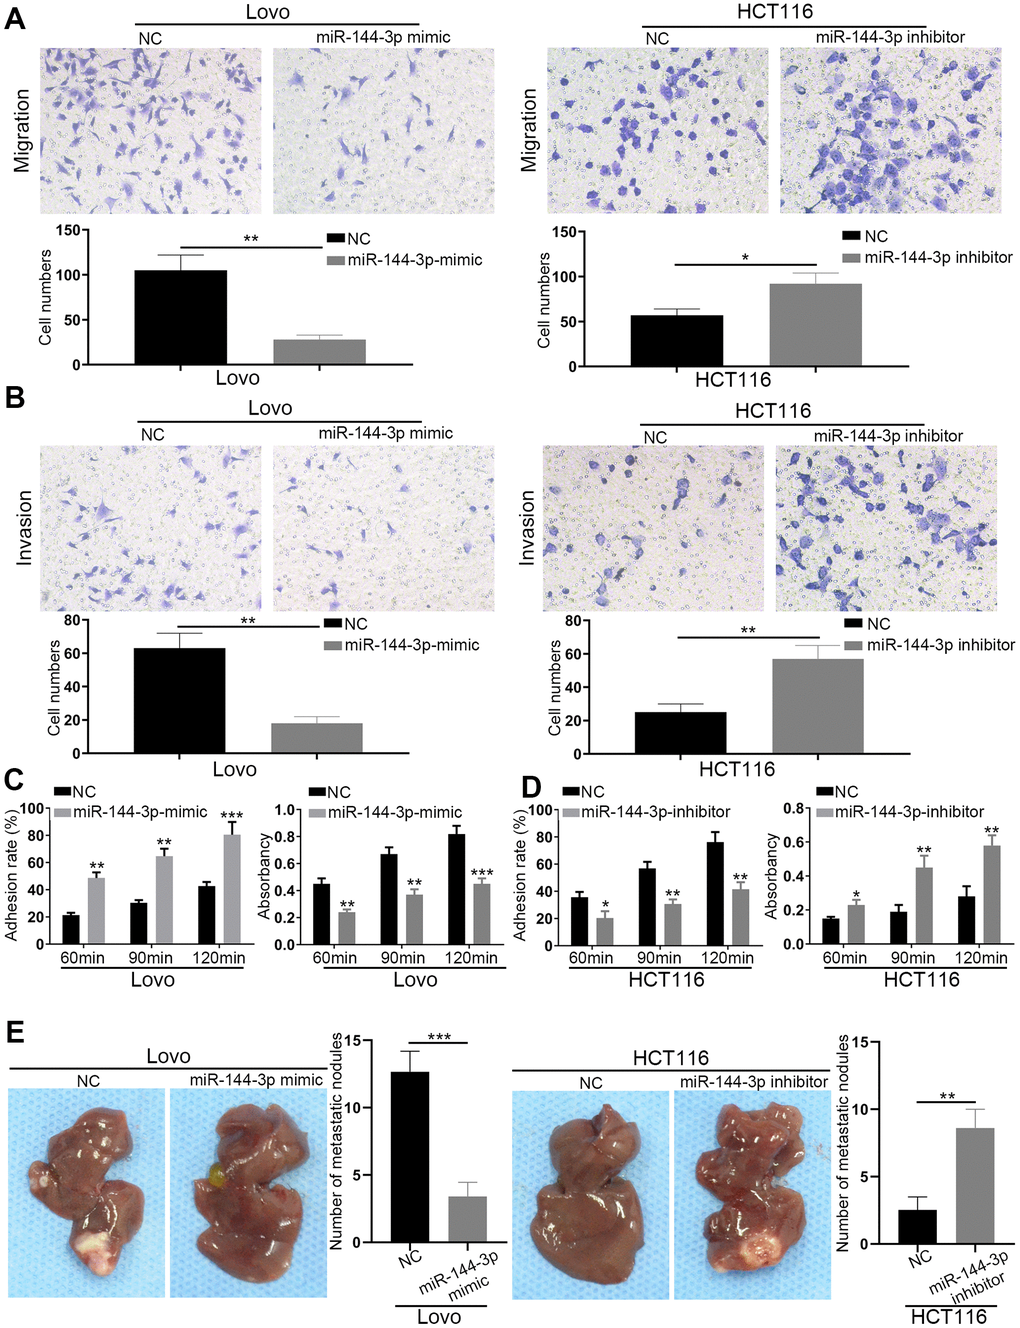 miR-144-3p inhibited CRA cell migration, invasion and tumor metastasis. (A) Transwell migration assay of migratory ability of Lovo cells transfected with miR-144-3p mimic and HCT116 cells transfected with miR-144-3p inhibitor. (B) Transwell invasion assay of invasive ability of Lovo cells transfected with miR-144-3p mimic and HCT116 cells transfected with miR-144-3p inhibitor. (C) Overexpression of miR-144-3p in Lovo cells significantly enhanced cell-cell adhesion and decreased cell-ECM adhesion. (D) Knockdown of miR-144-3p in HCT116 cells significantly inhibited cell-cell adhesion and increased the cell-ECM adhesion. (E) In vivo metastatic assays by splenic injection showed that miR-144-3p inhibited CRA liver metastasis. The number of liver metastatic nodules from mice with inoculation of LovomiR-144-3p mimic cells was significantly smaller than that from mice with inoculation of control cells, whereas the number of liver metastatic nodules from mice with inoculation of HCT116miR-144-3p inhibitor cells was significantly larger than that from mice with inoculation of control cells. ECM, extracellular matrix. *, PPP 